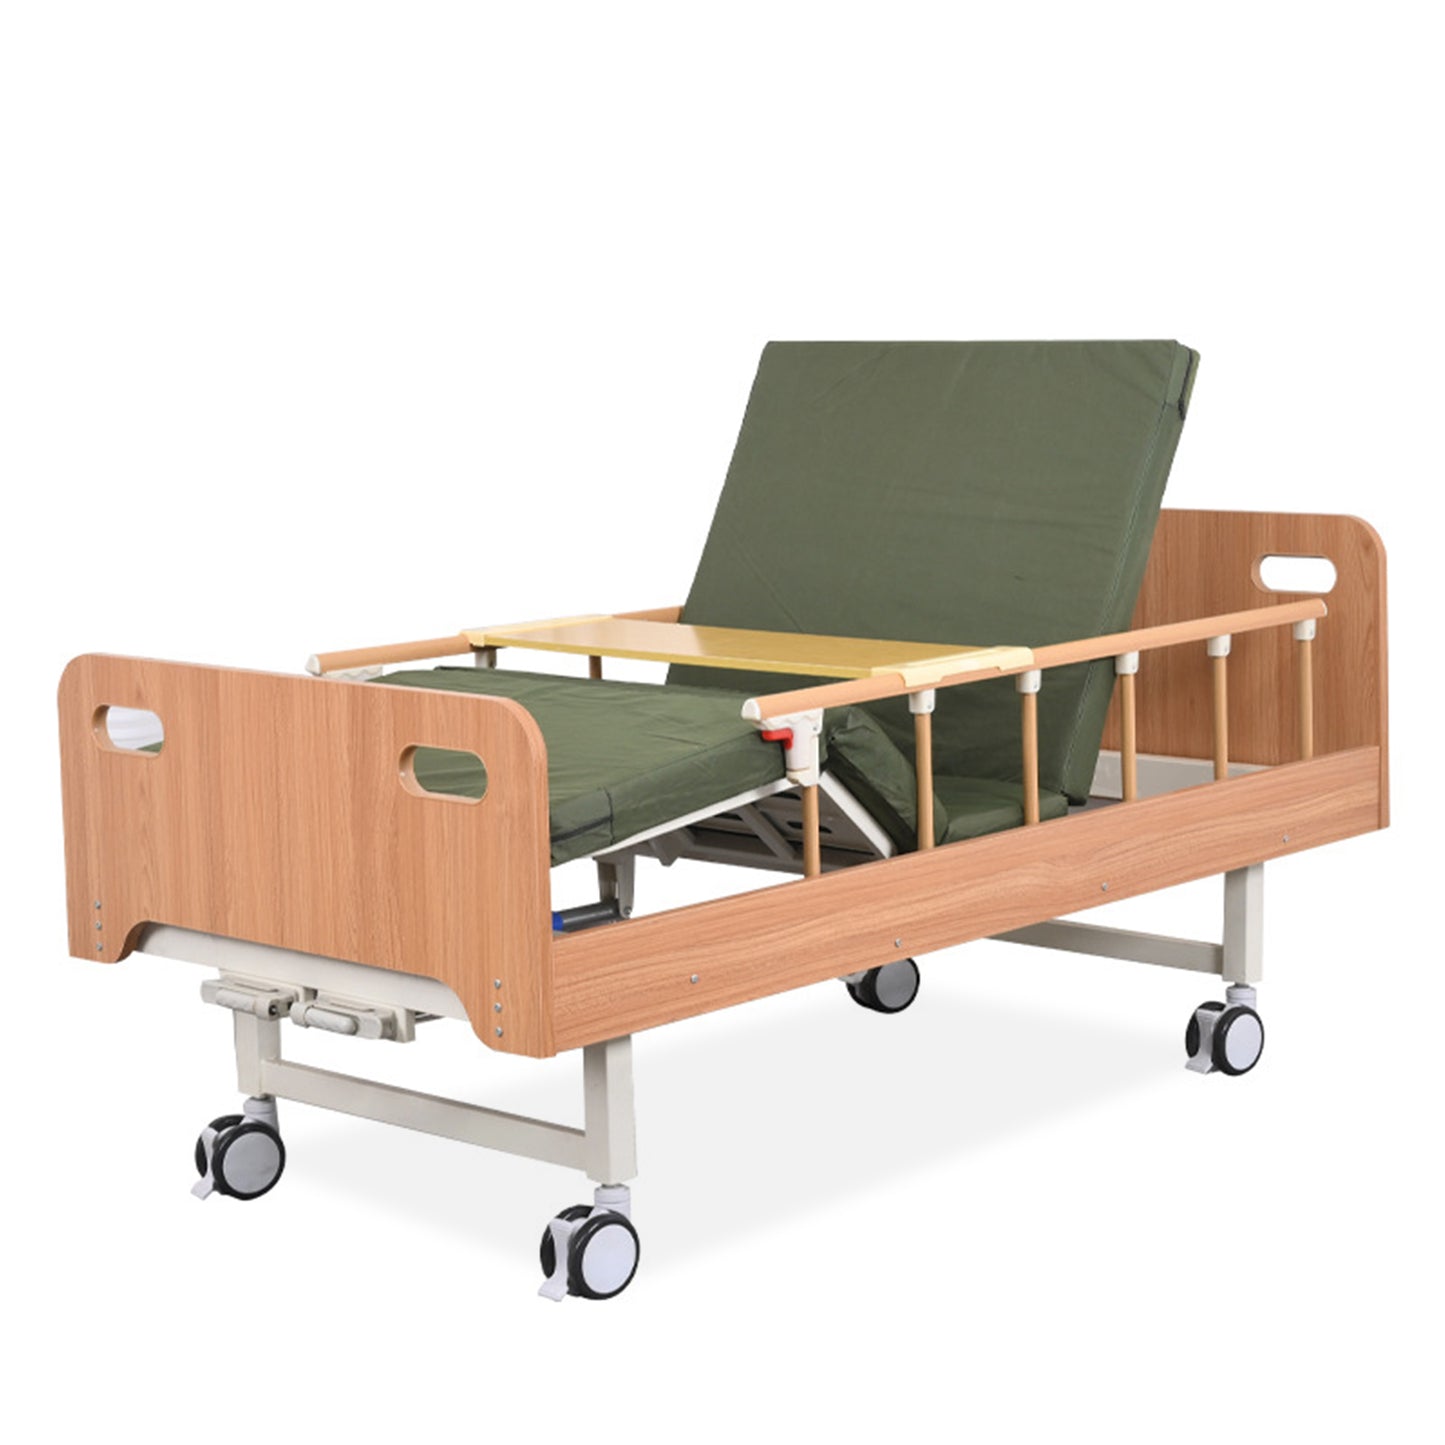 Wooden Hidden Double Swing Handle Hospital Bed w/ Full-Length Adjustable Guardrails, Wooden Dining Table and 2.36" Mattress